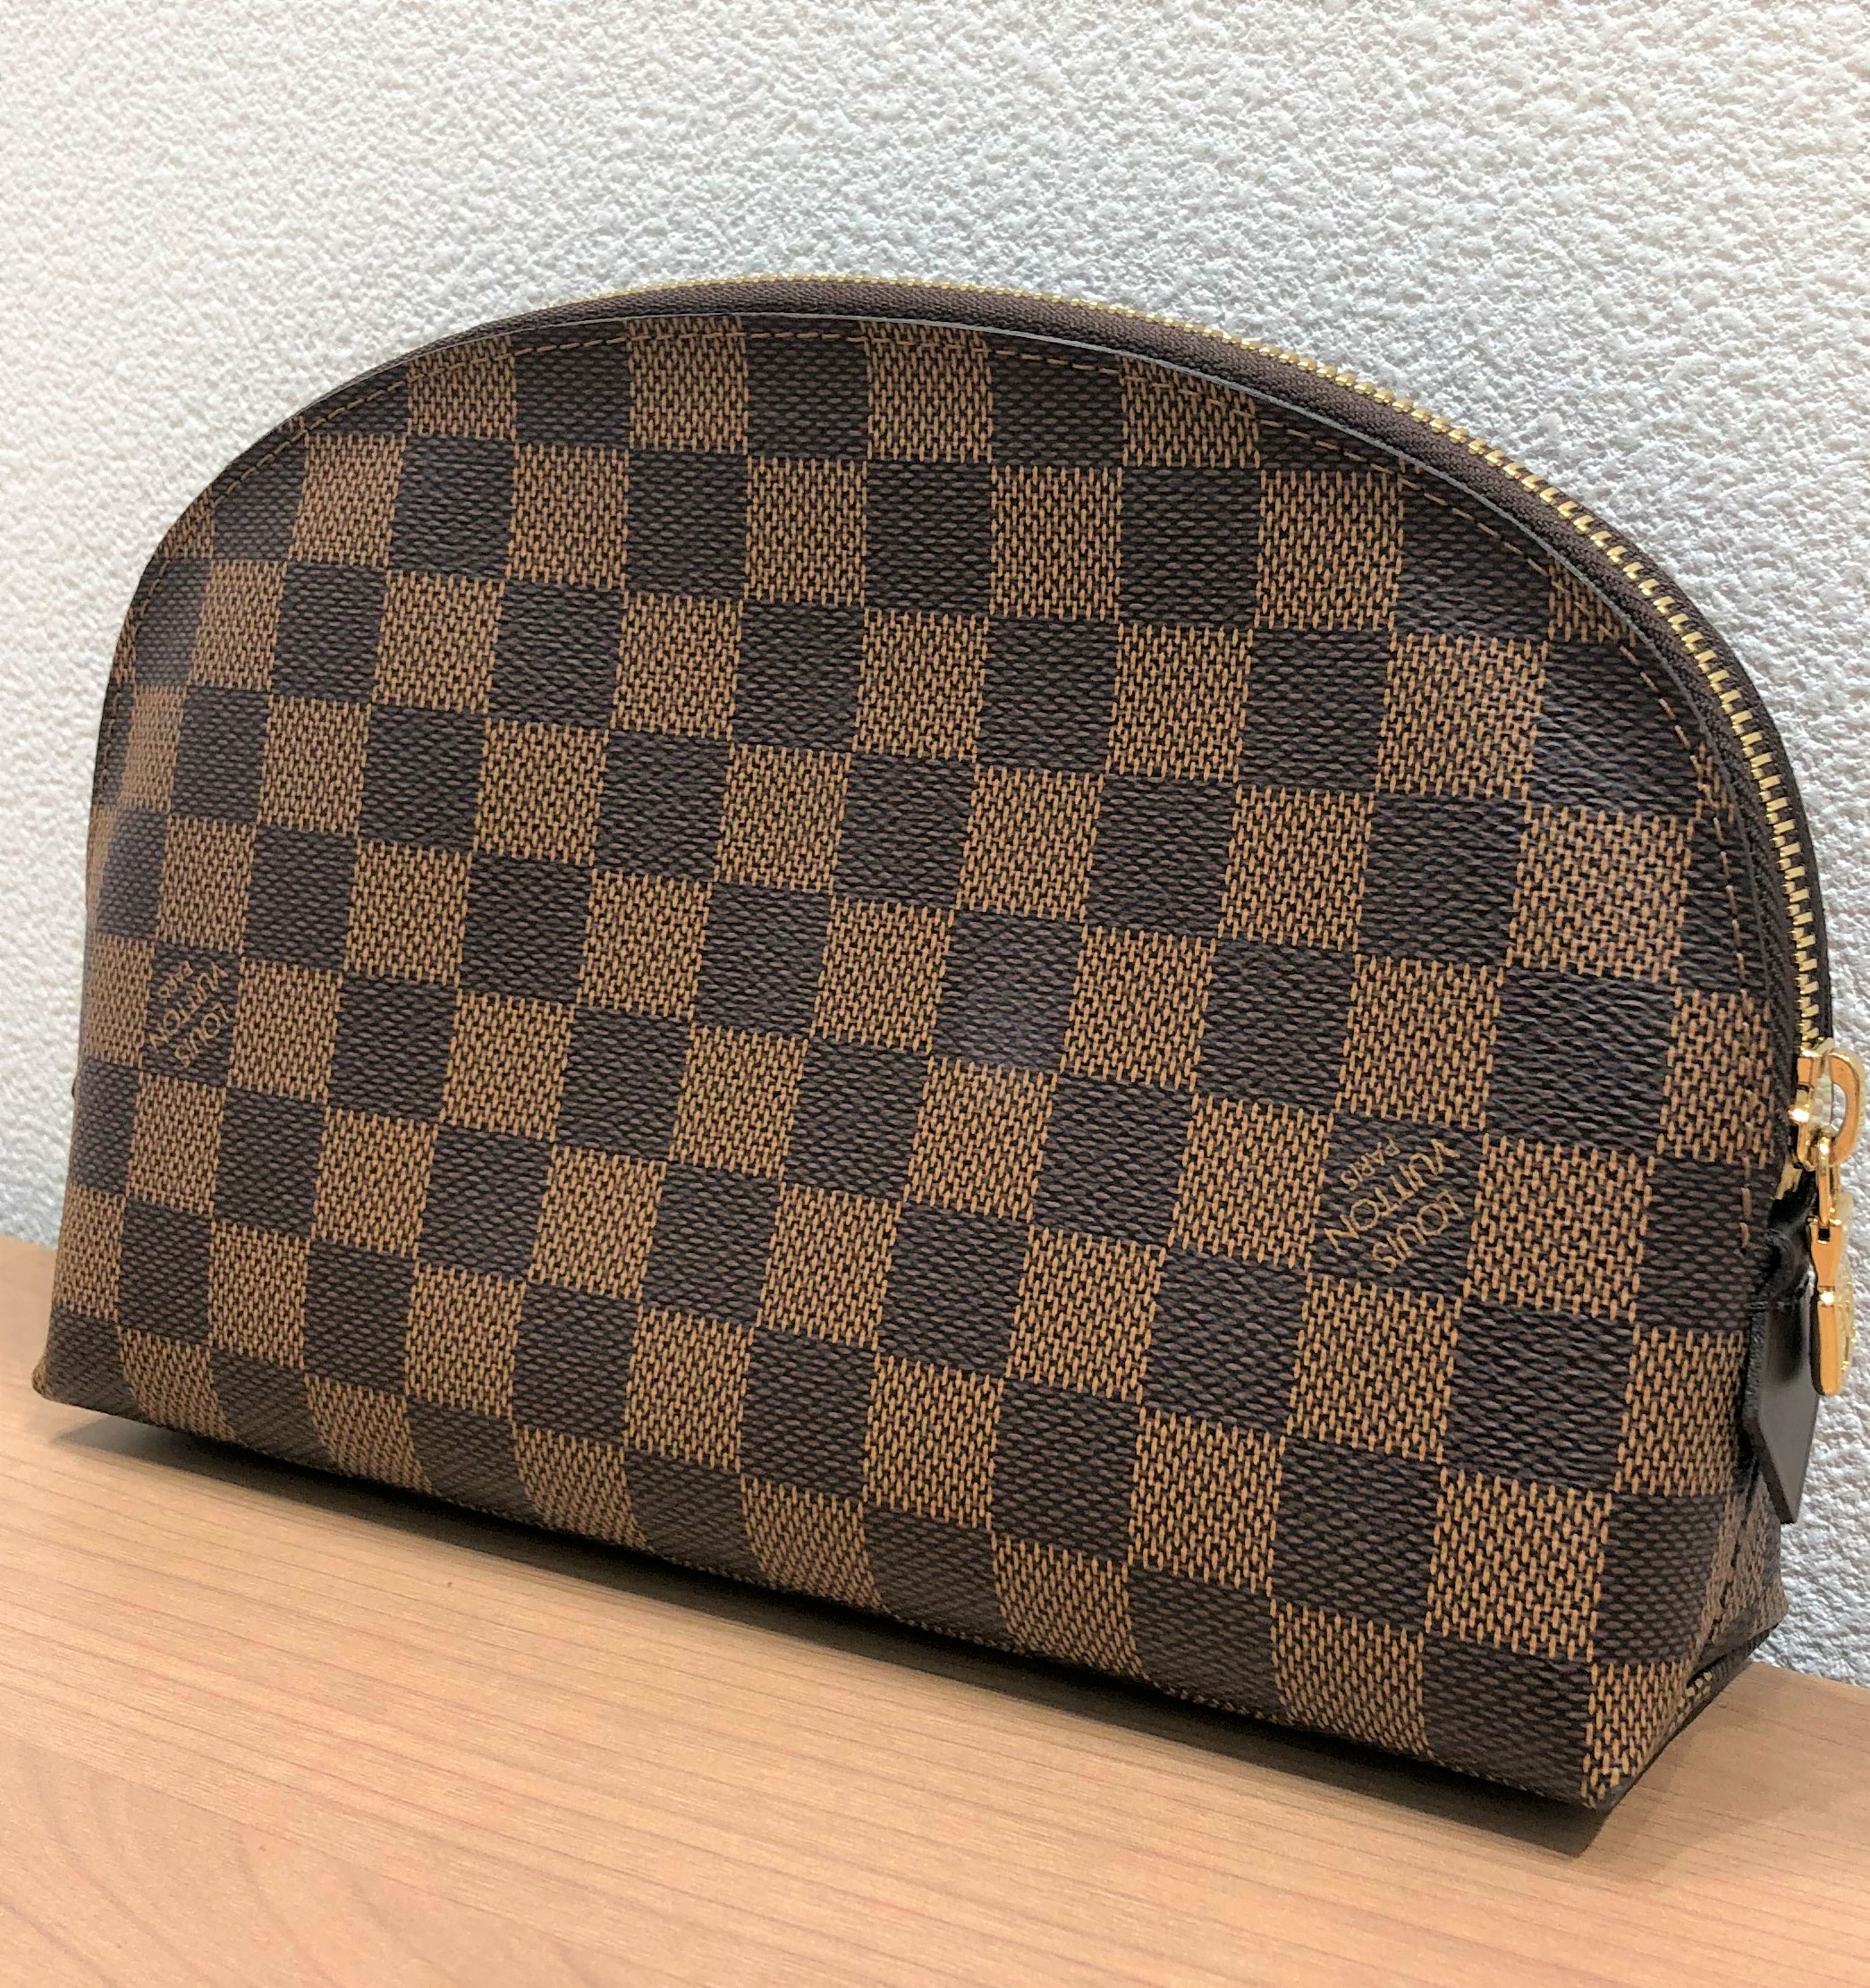 【LOUIS VUITTON/ルイヴィトン】ダミエ ポシェットコスメティックGM N23345 ポーチ